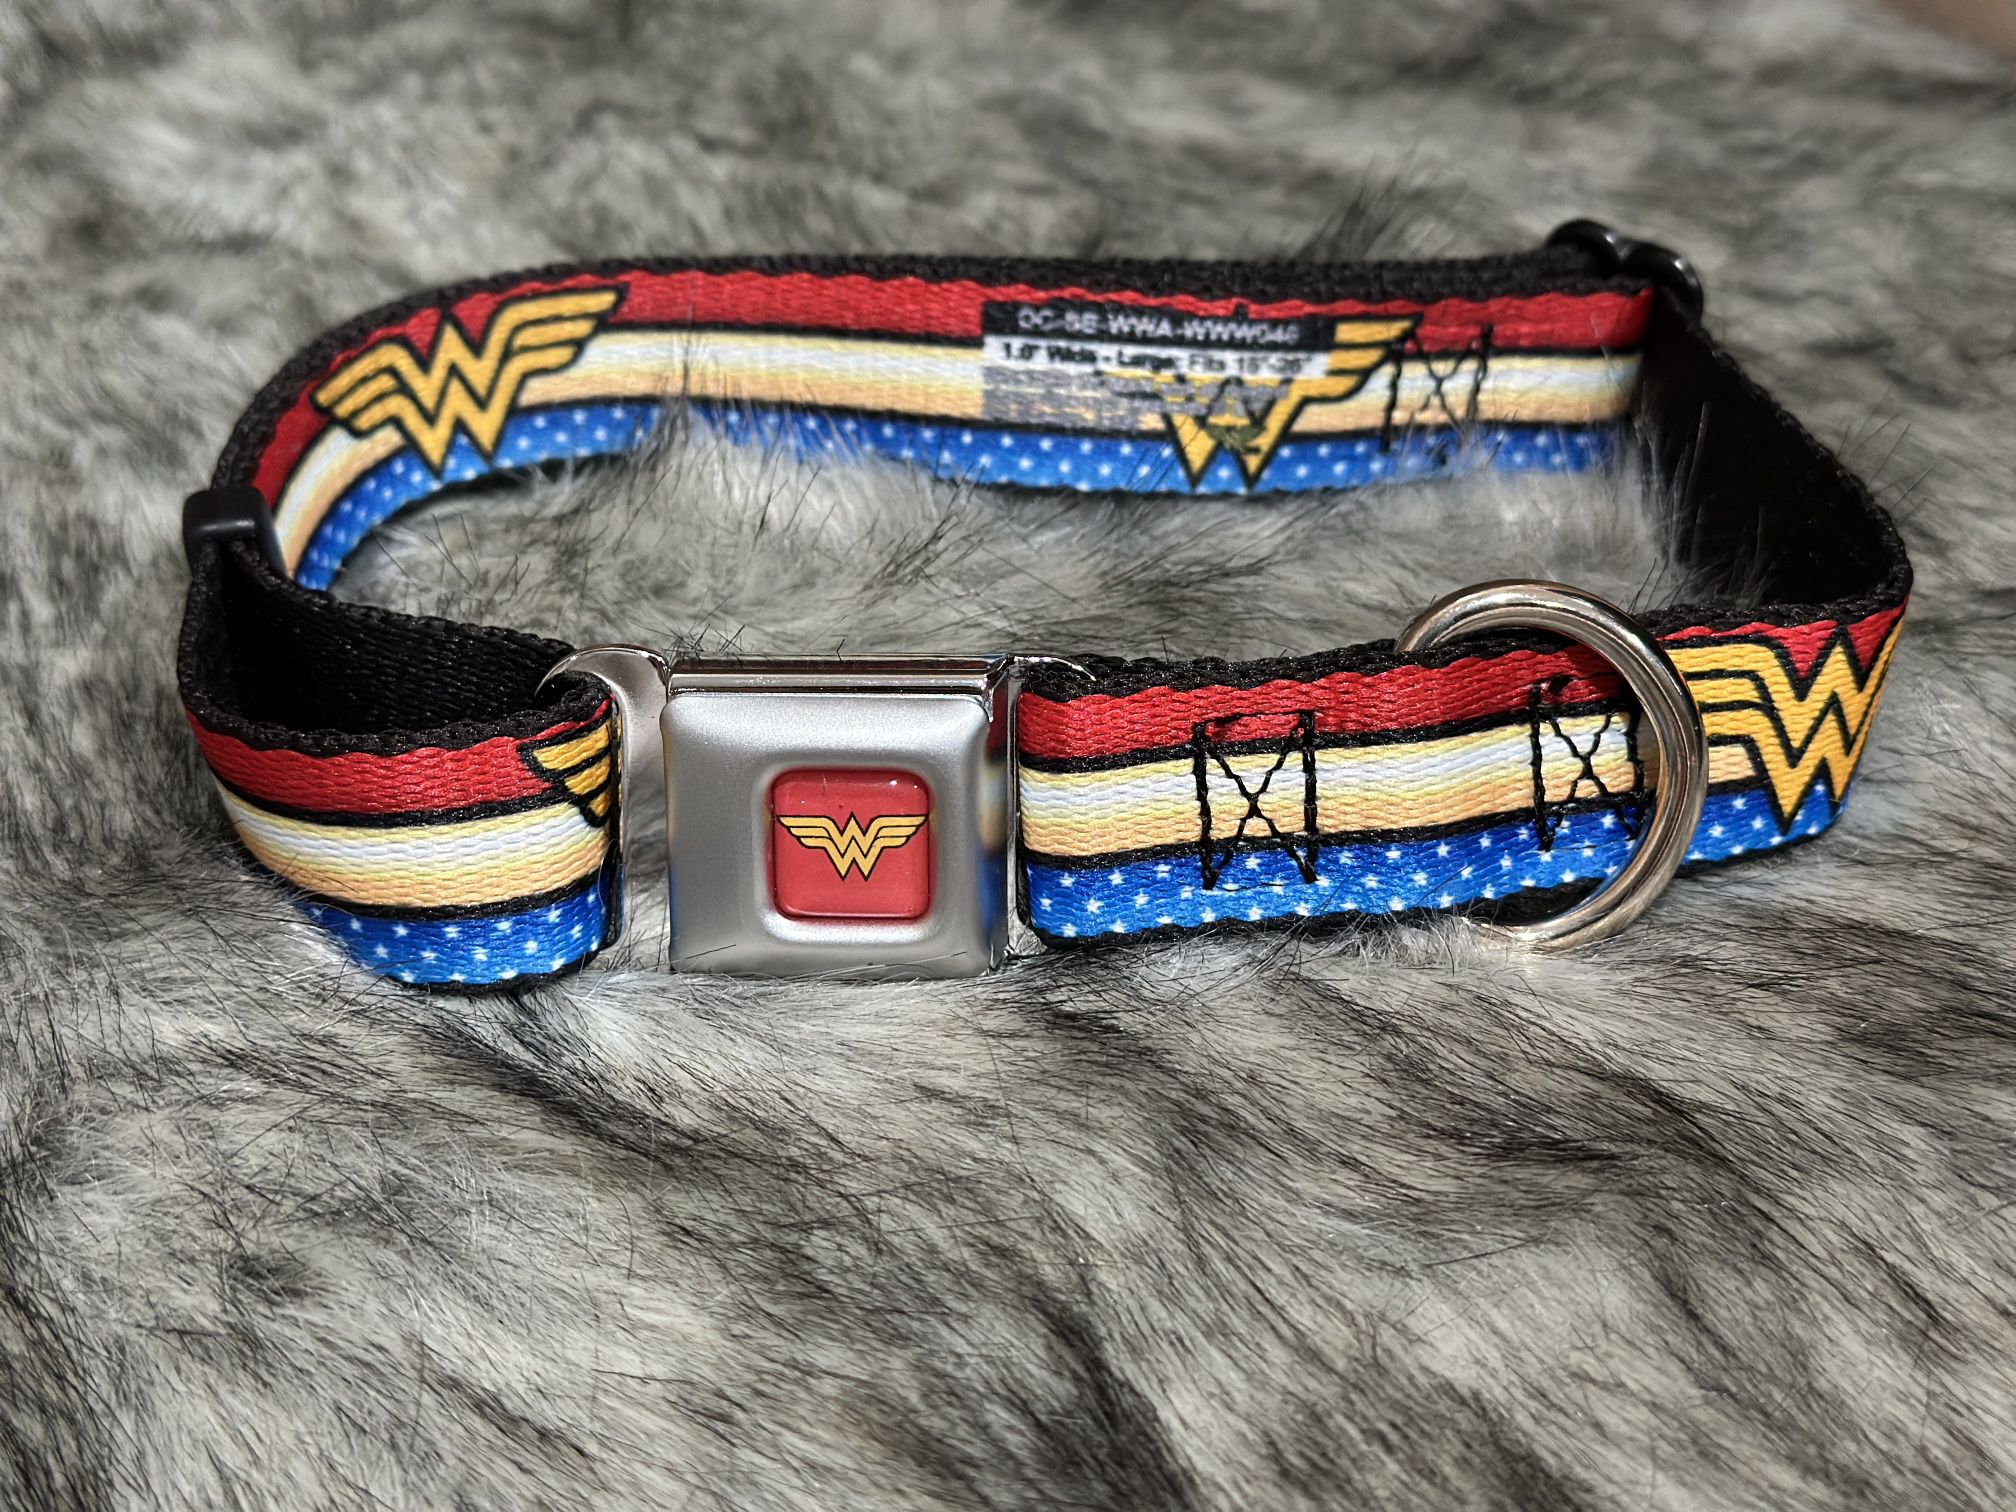 Wonder Woman Dog Collar Large Fits Neck Size 15” to 26” Brand New Seat Belt Style